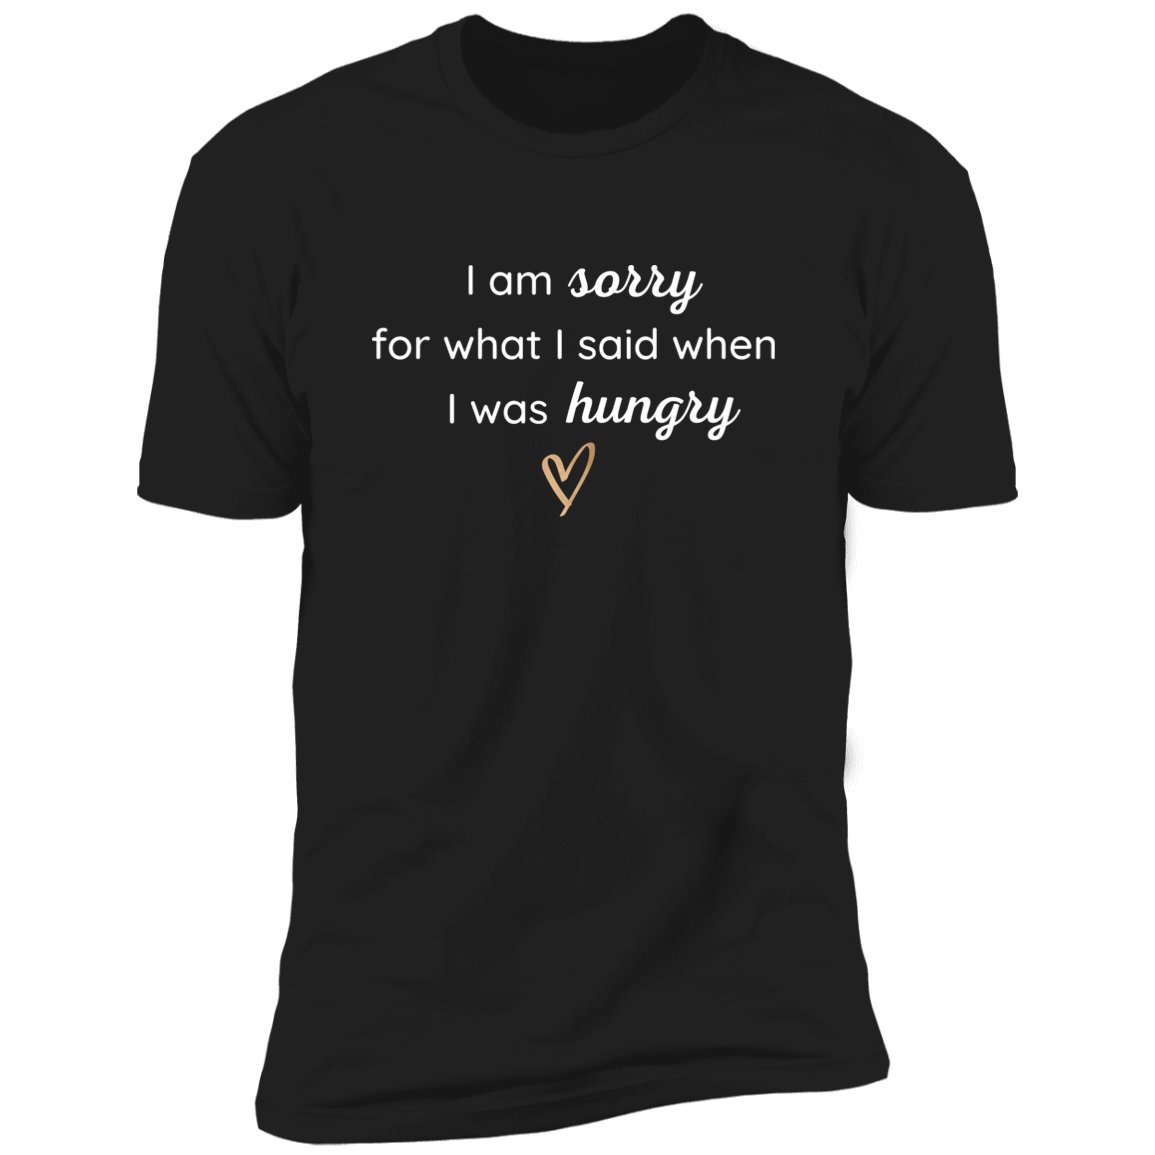 When I Was Hungry (T-Shirt)